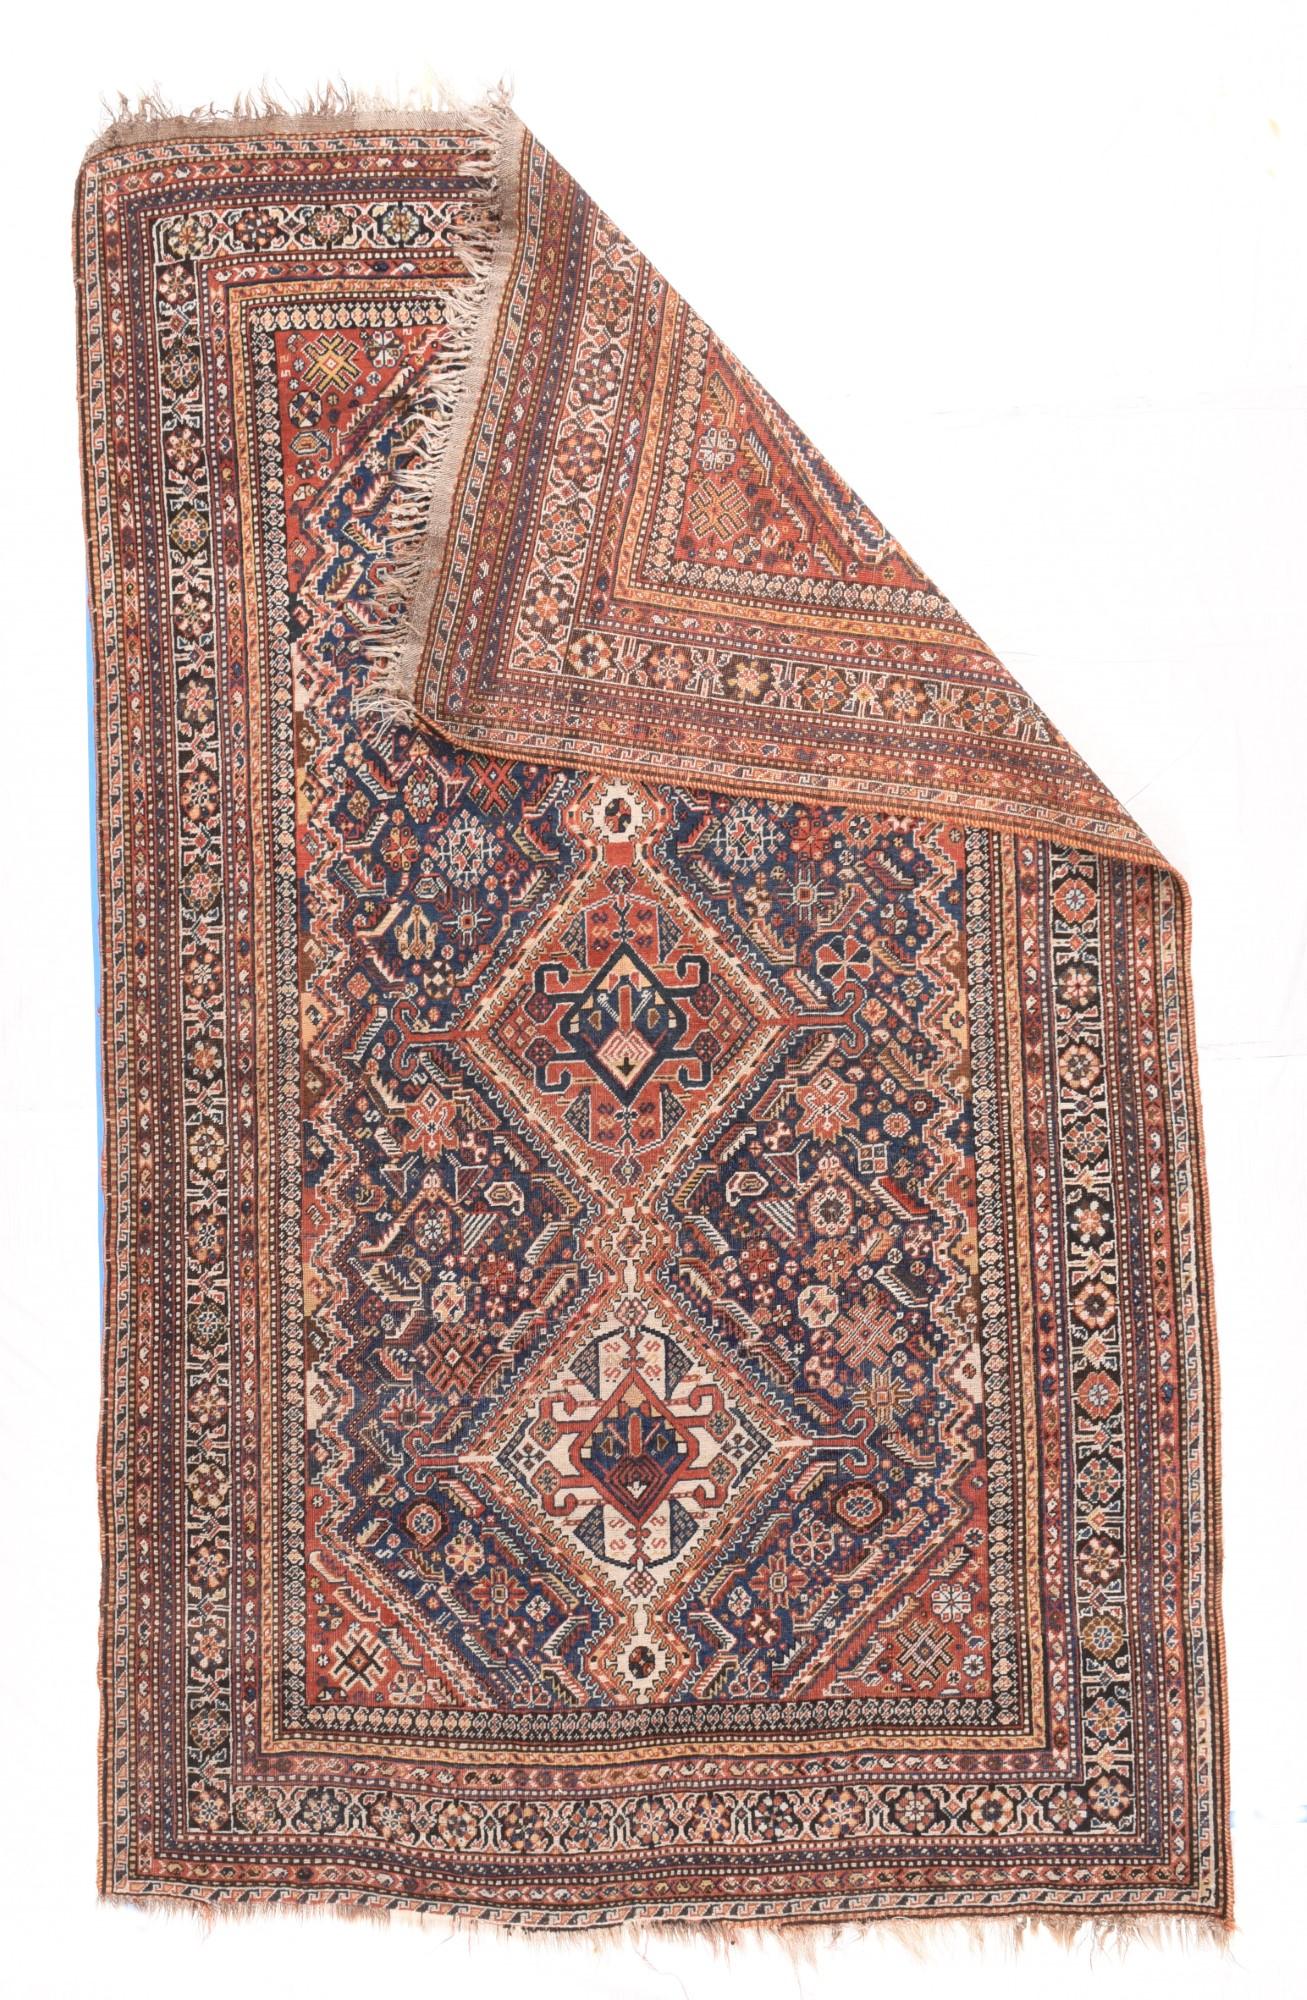 Antique Quashkai rug measures 5' x 8'2''. Probably from the Rahimlu Qashghai suibtribe as indicated by the bracket and rosette main border, this SW Persian long tribal scatter shows an ivory and rust-red three diamond pole medallion, each section